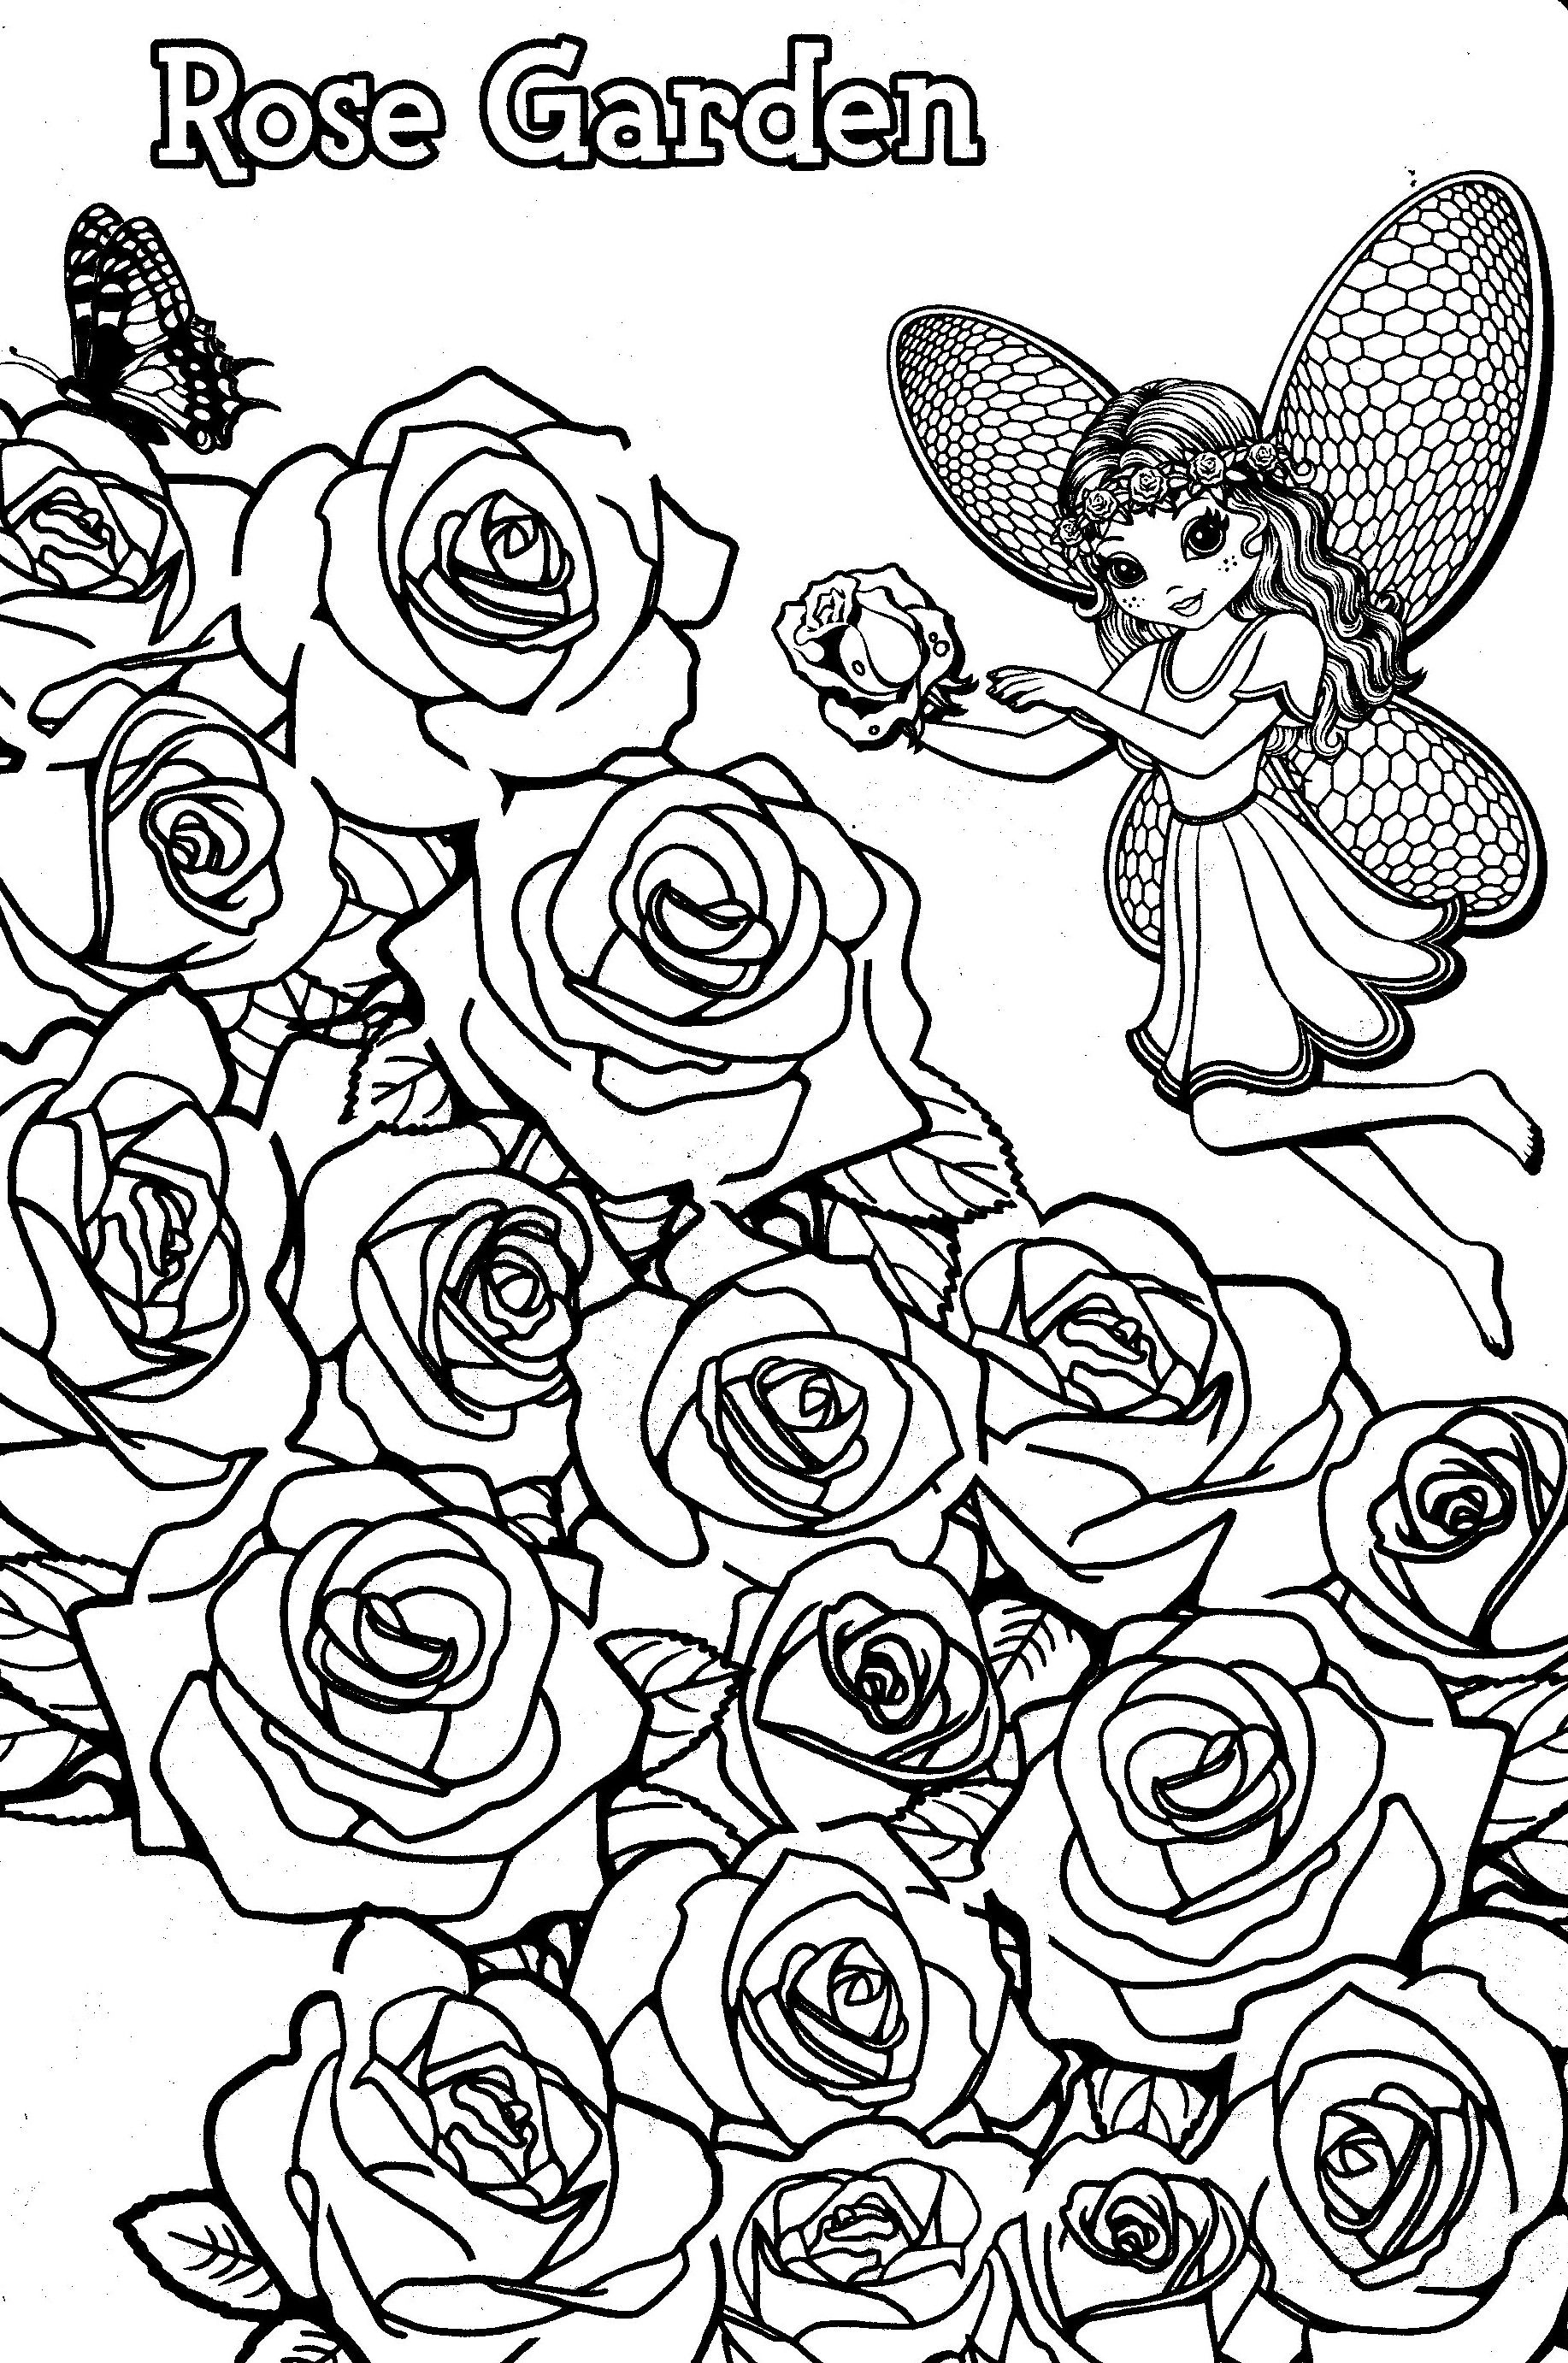 fairy-woodland-garden-scenes-coloring-pages-for-kids-fairies-etsy